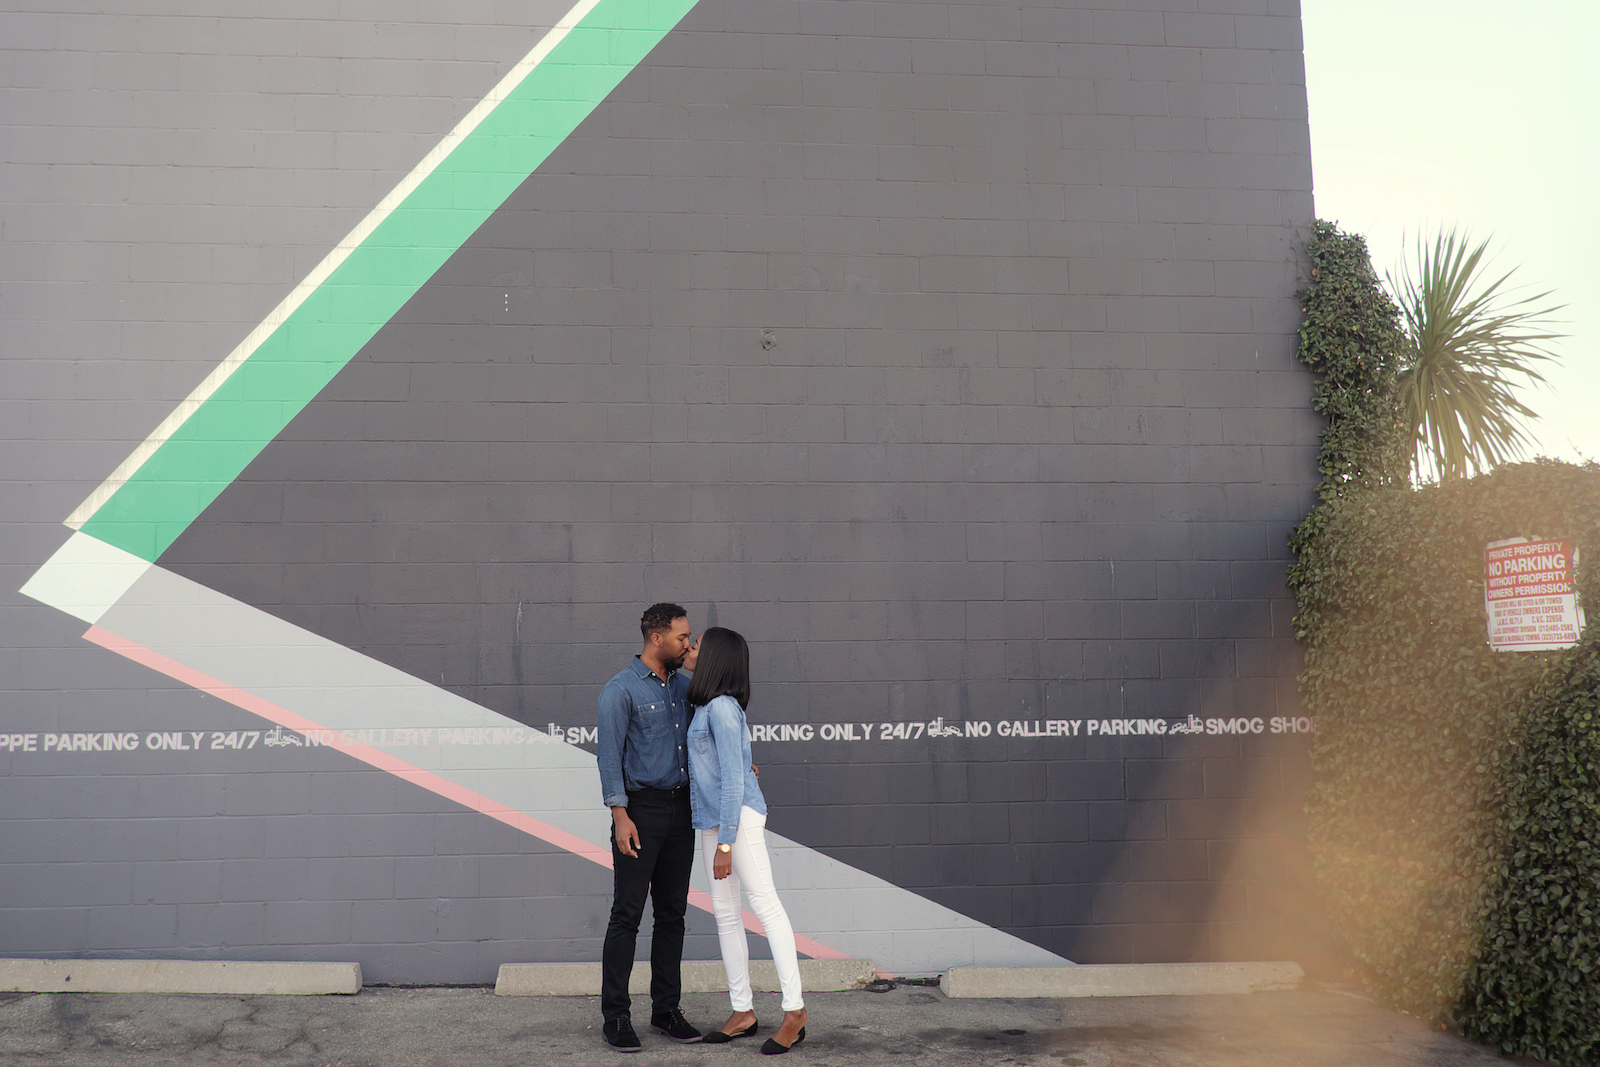 Los Angeles - Couple Portrait - Smog Shoppe - California Dreaming Mural - Holiday